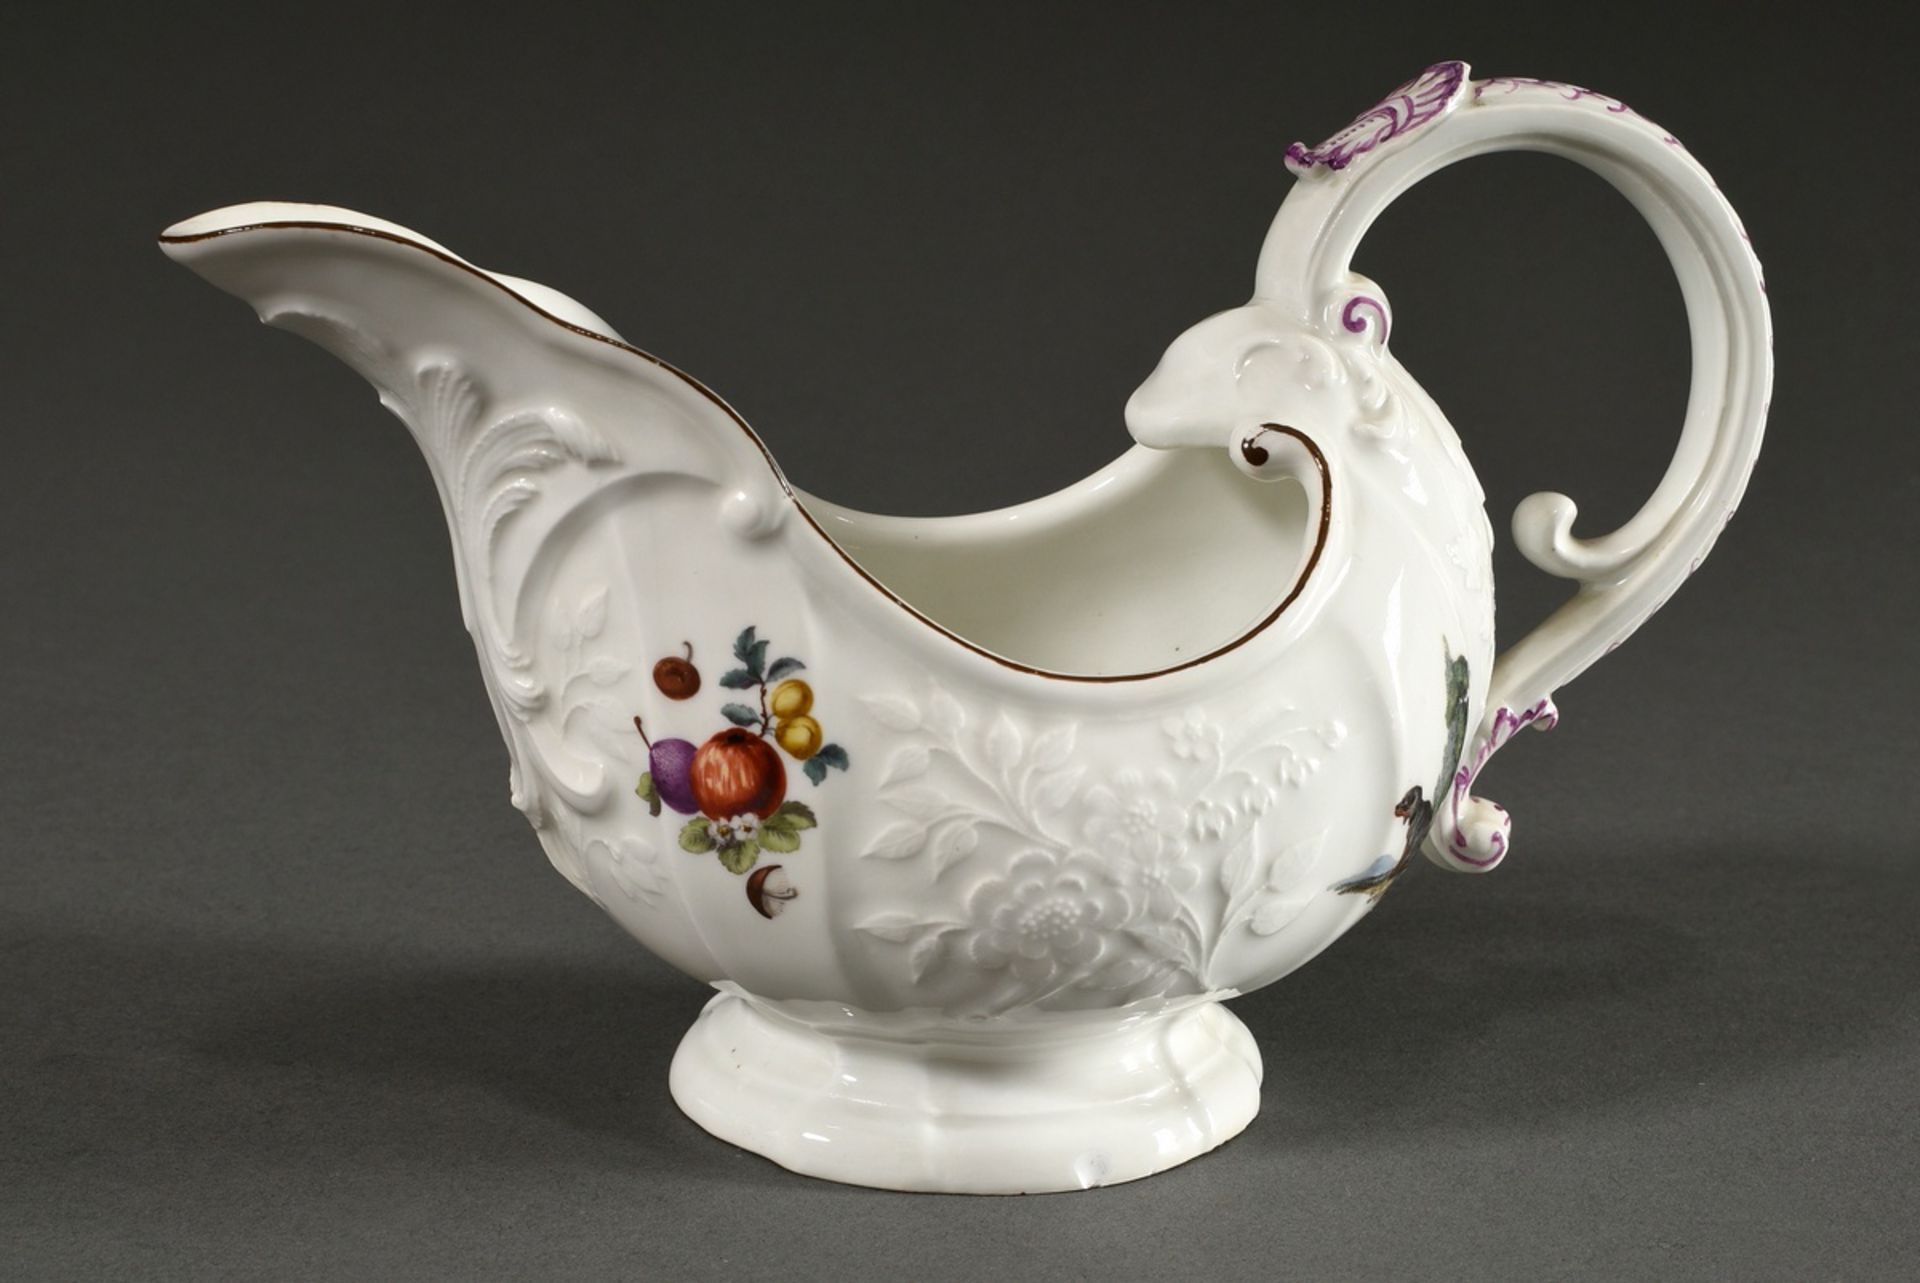 Meissen sauce boat with polychrome painting "Bird and Dog" as well as rich relief, h. 14,7cm, Prove